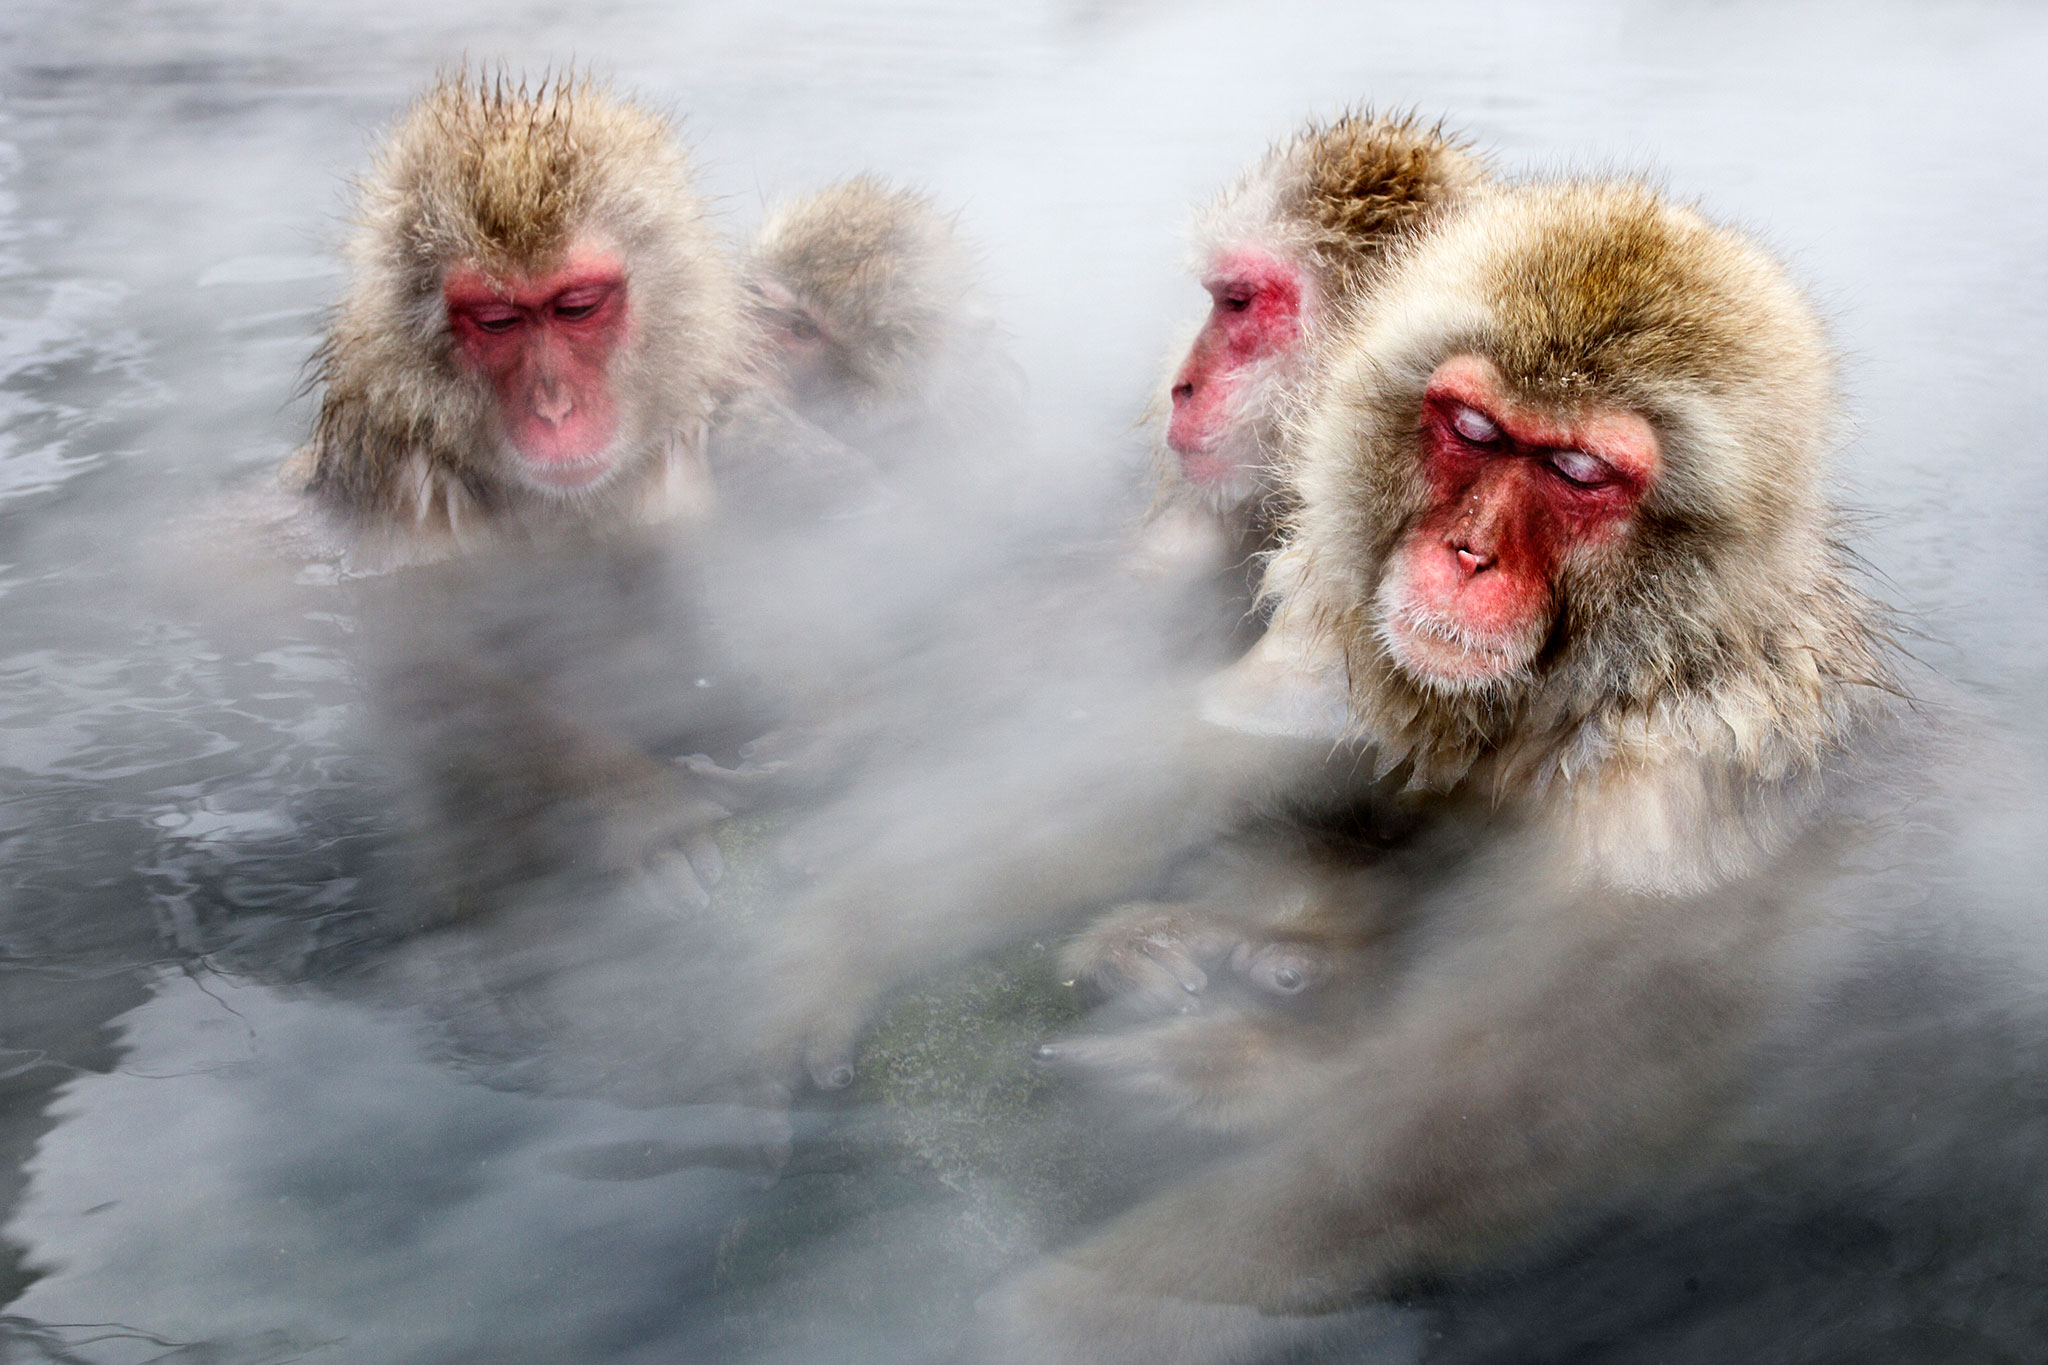 Japanese Snow Monkeys Get Stress Relief, Warmth in Hot Springs